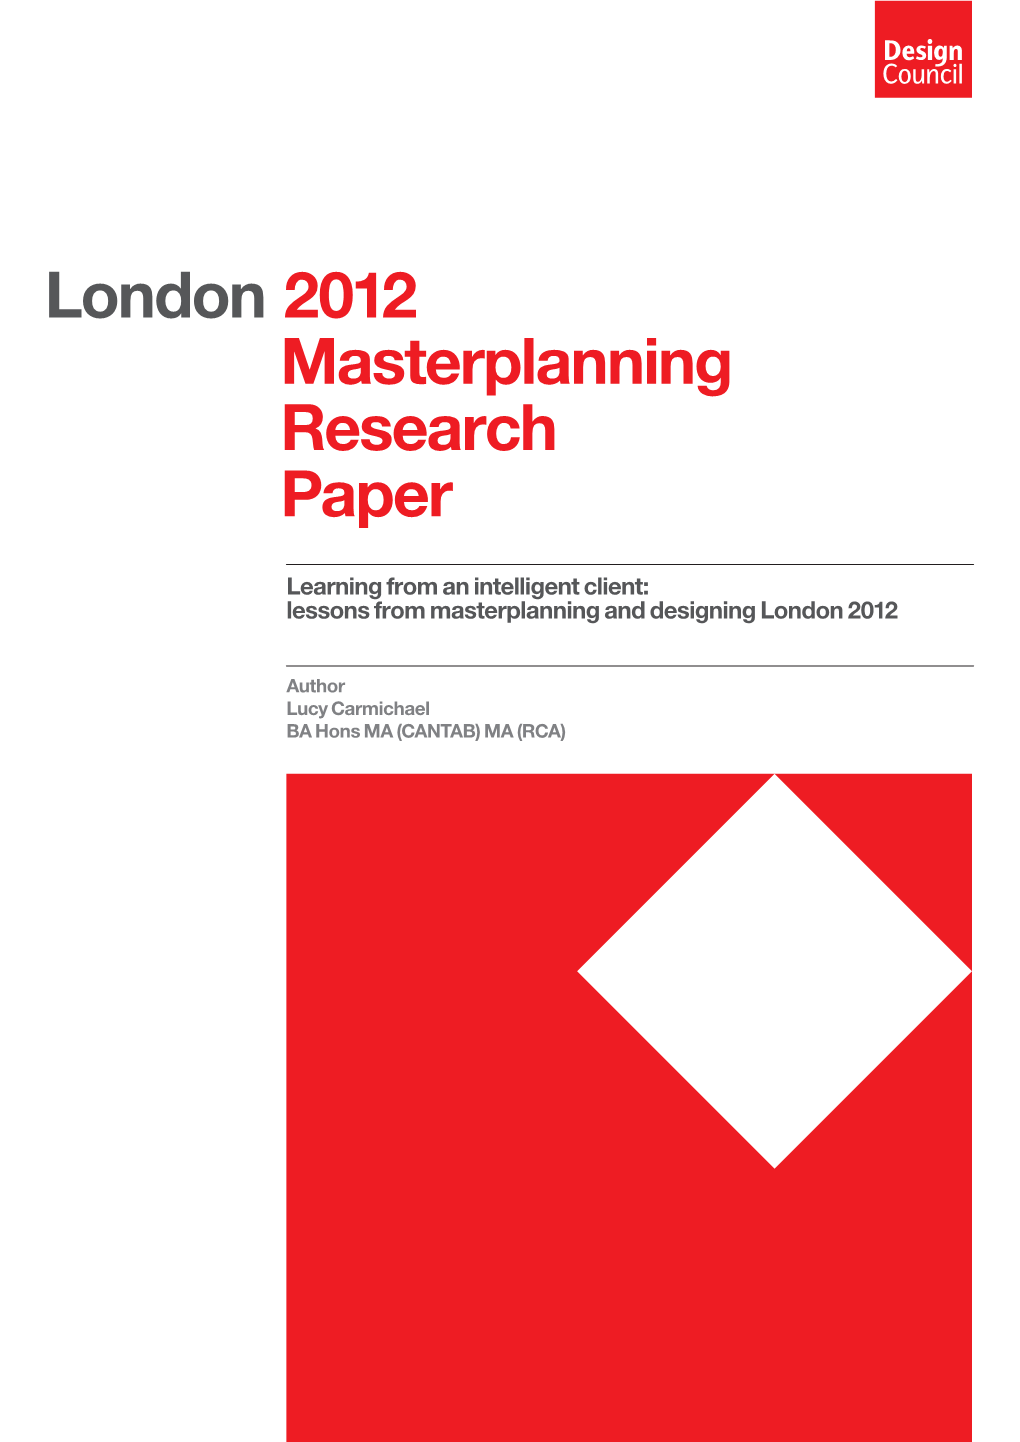 Learning from an Intelligent Client: Lessons from Masterplanning and Designing London 2012